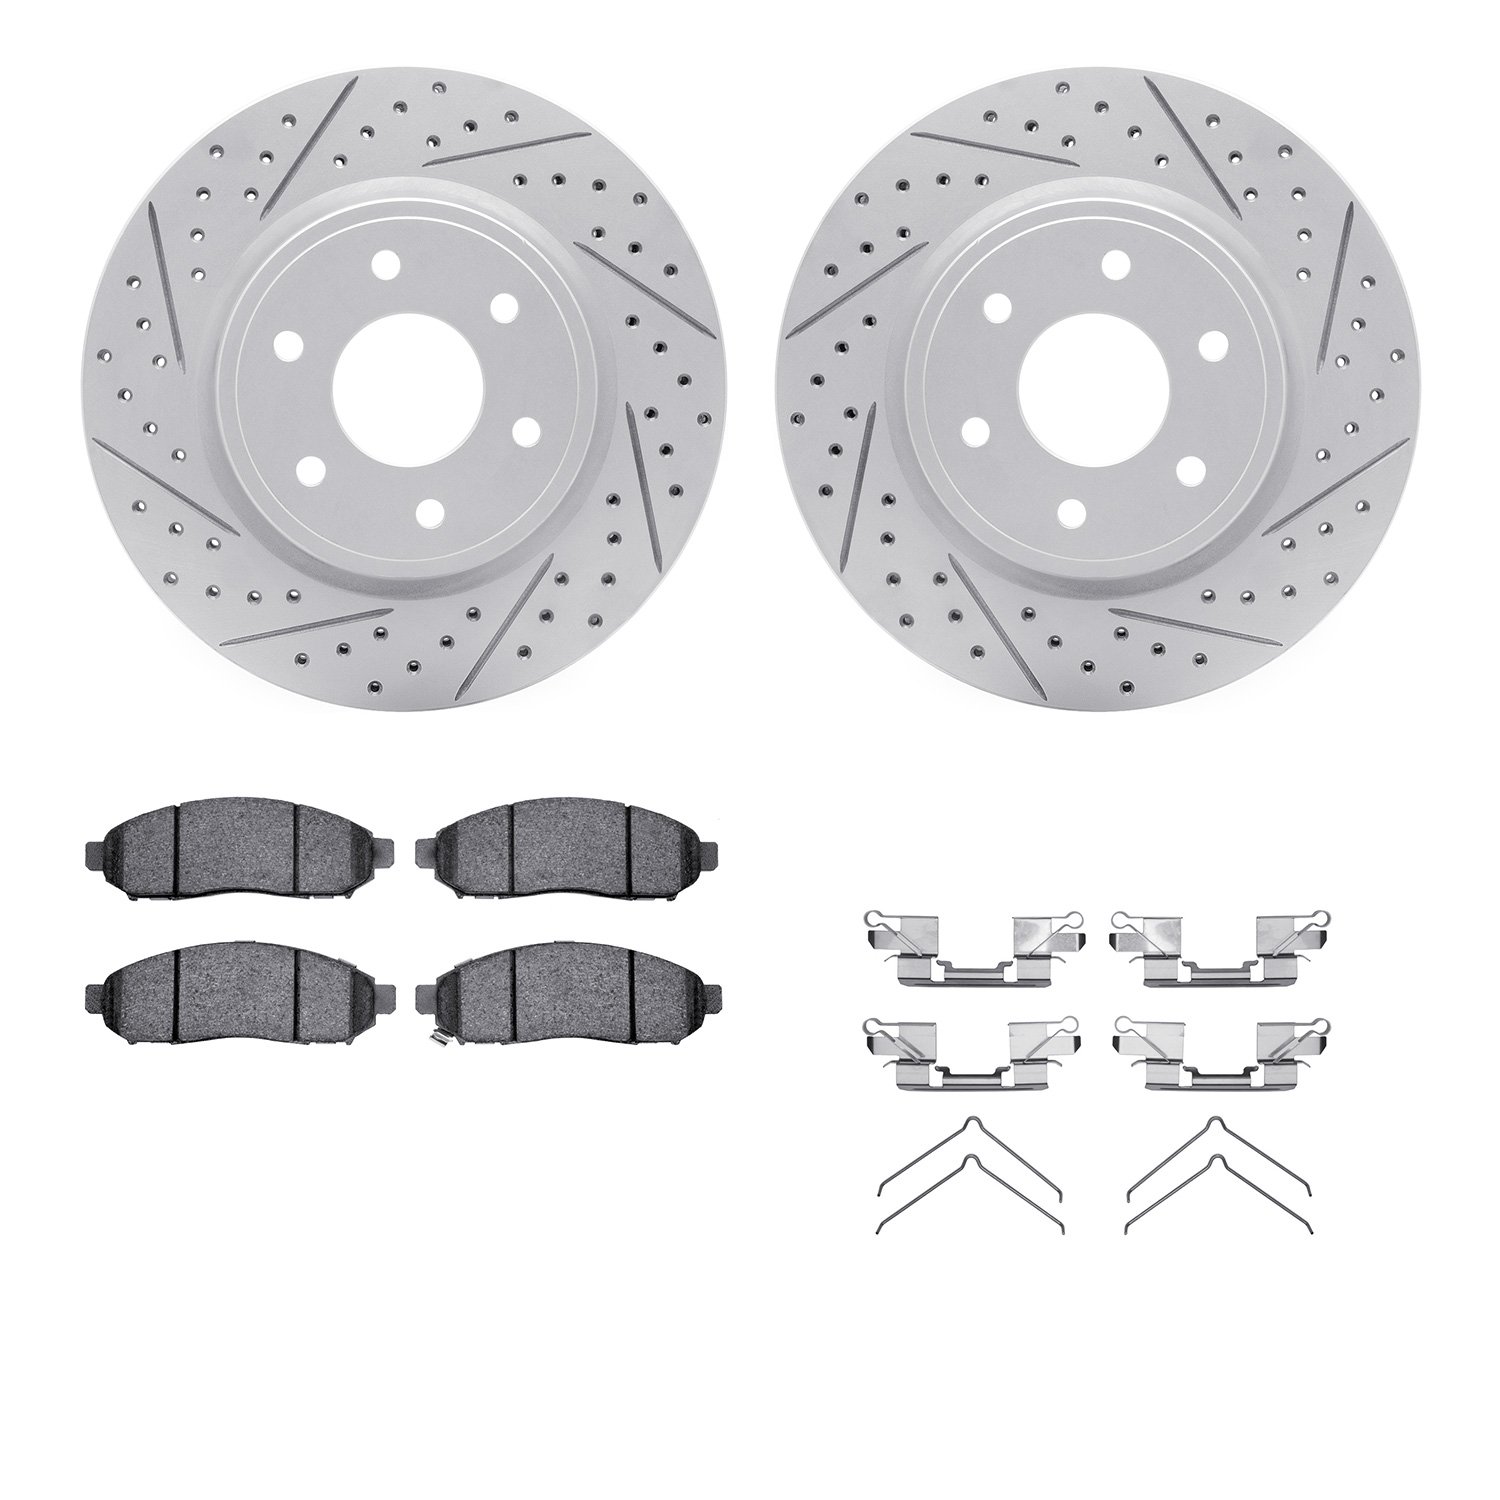 2512-67107 Geoperformance Drilled/Slotted Rotors w/5000 Advanced Brake Pads Kit & Hardware, Fits Select Multiple Makes/Models, P